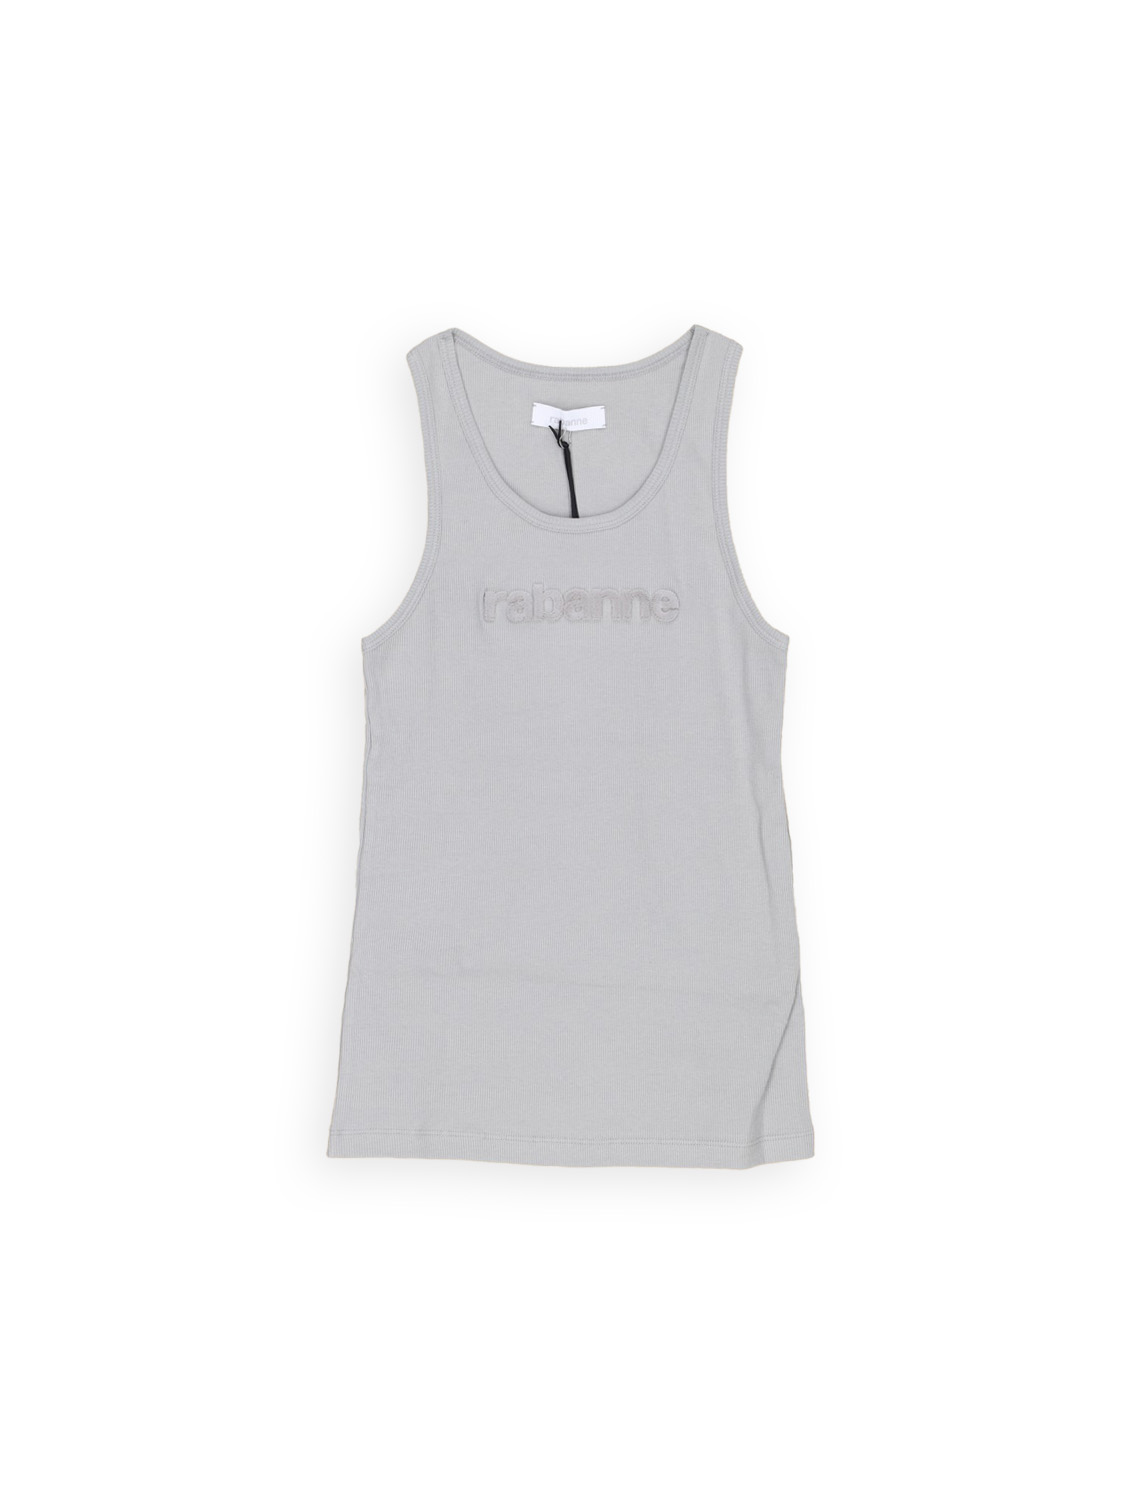 Tanktop with lableprint 